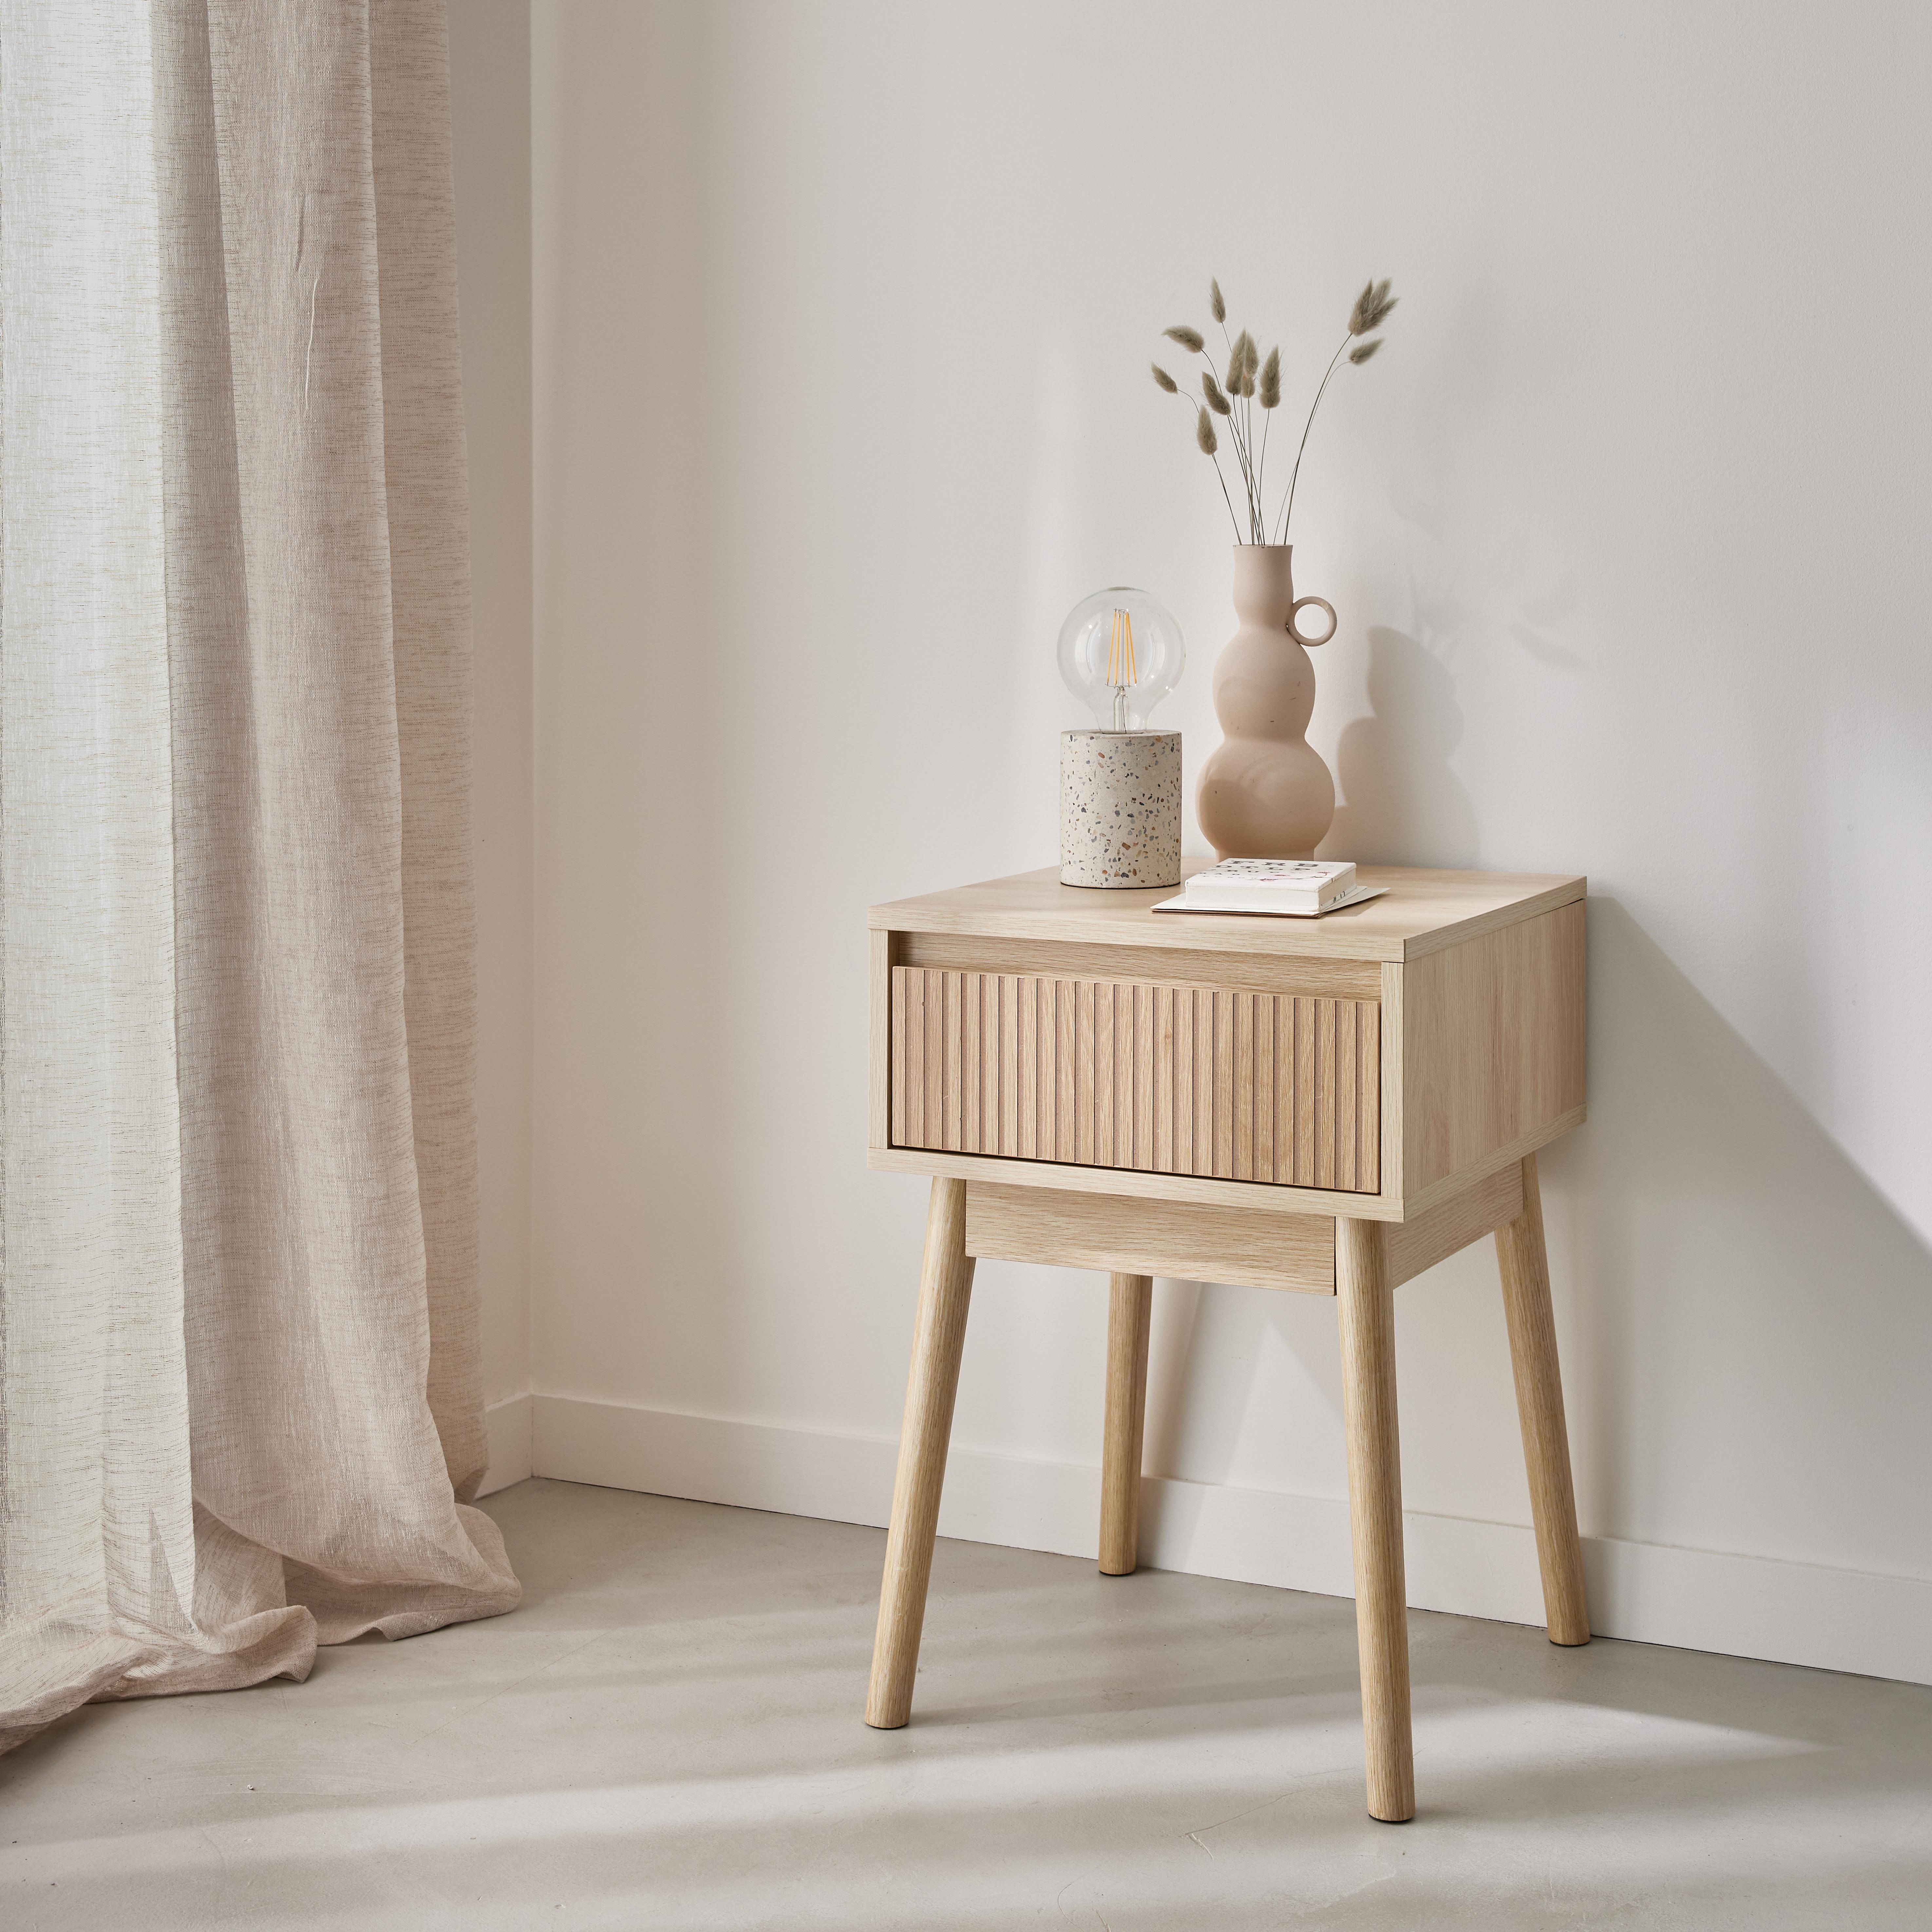 Bedside table with one drawer. Natural colour laminate panels. Fir wood legs.  W 39 x 39 x H 55.4cm LINEAR Photo2